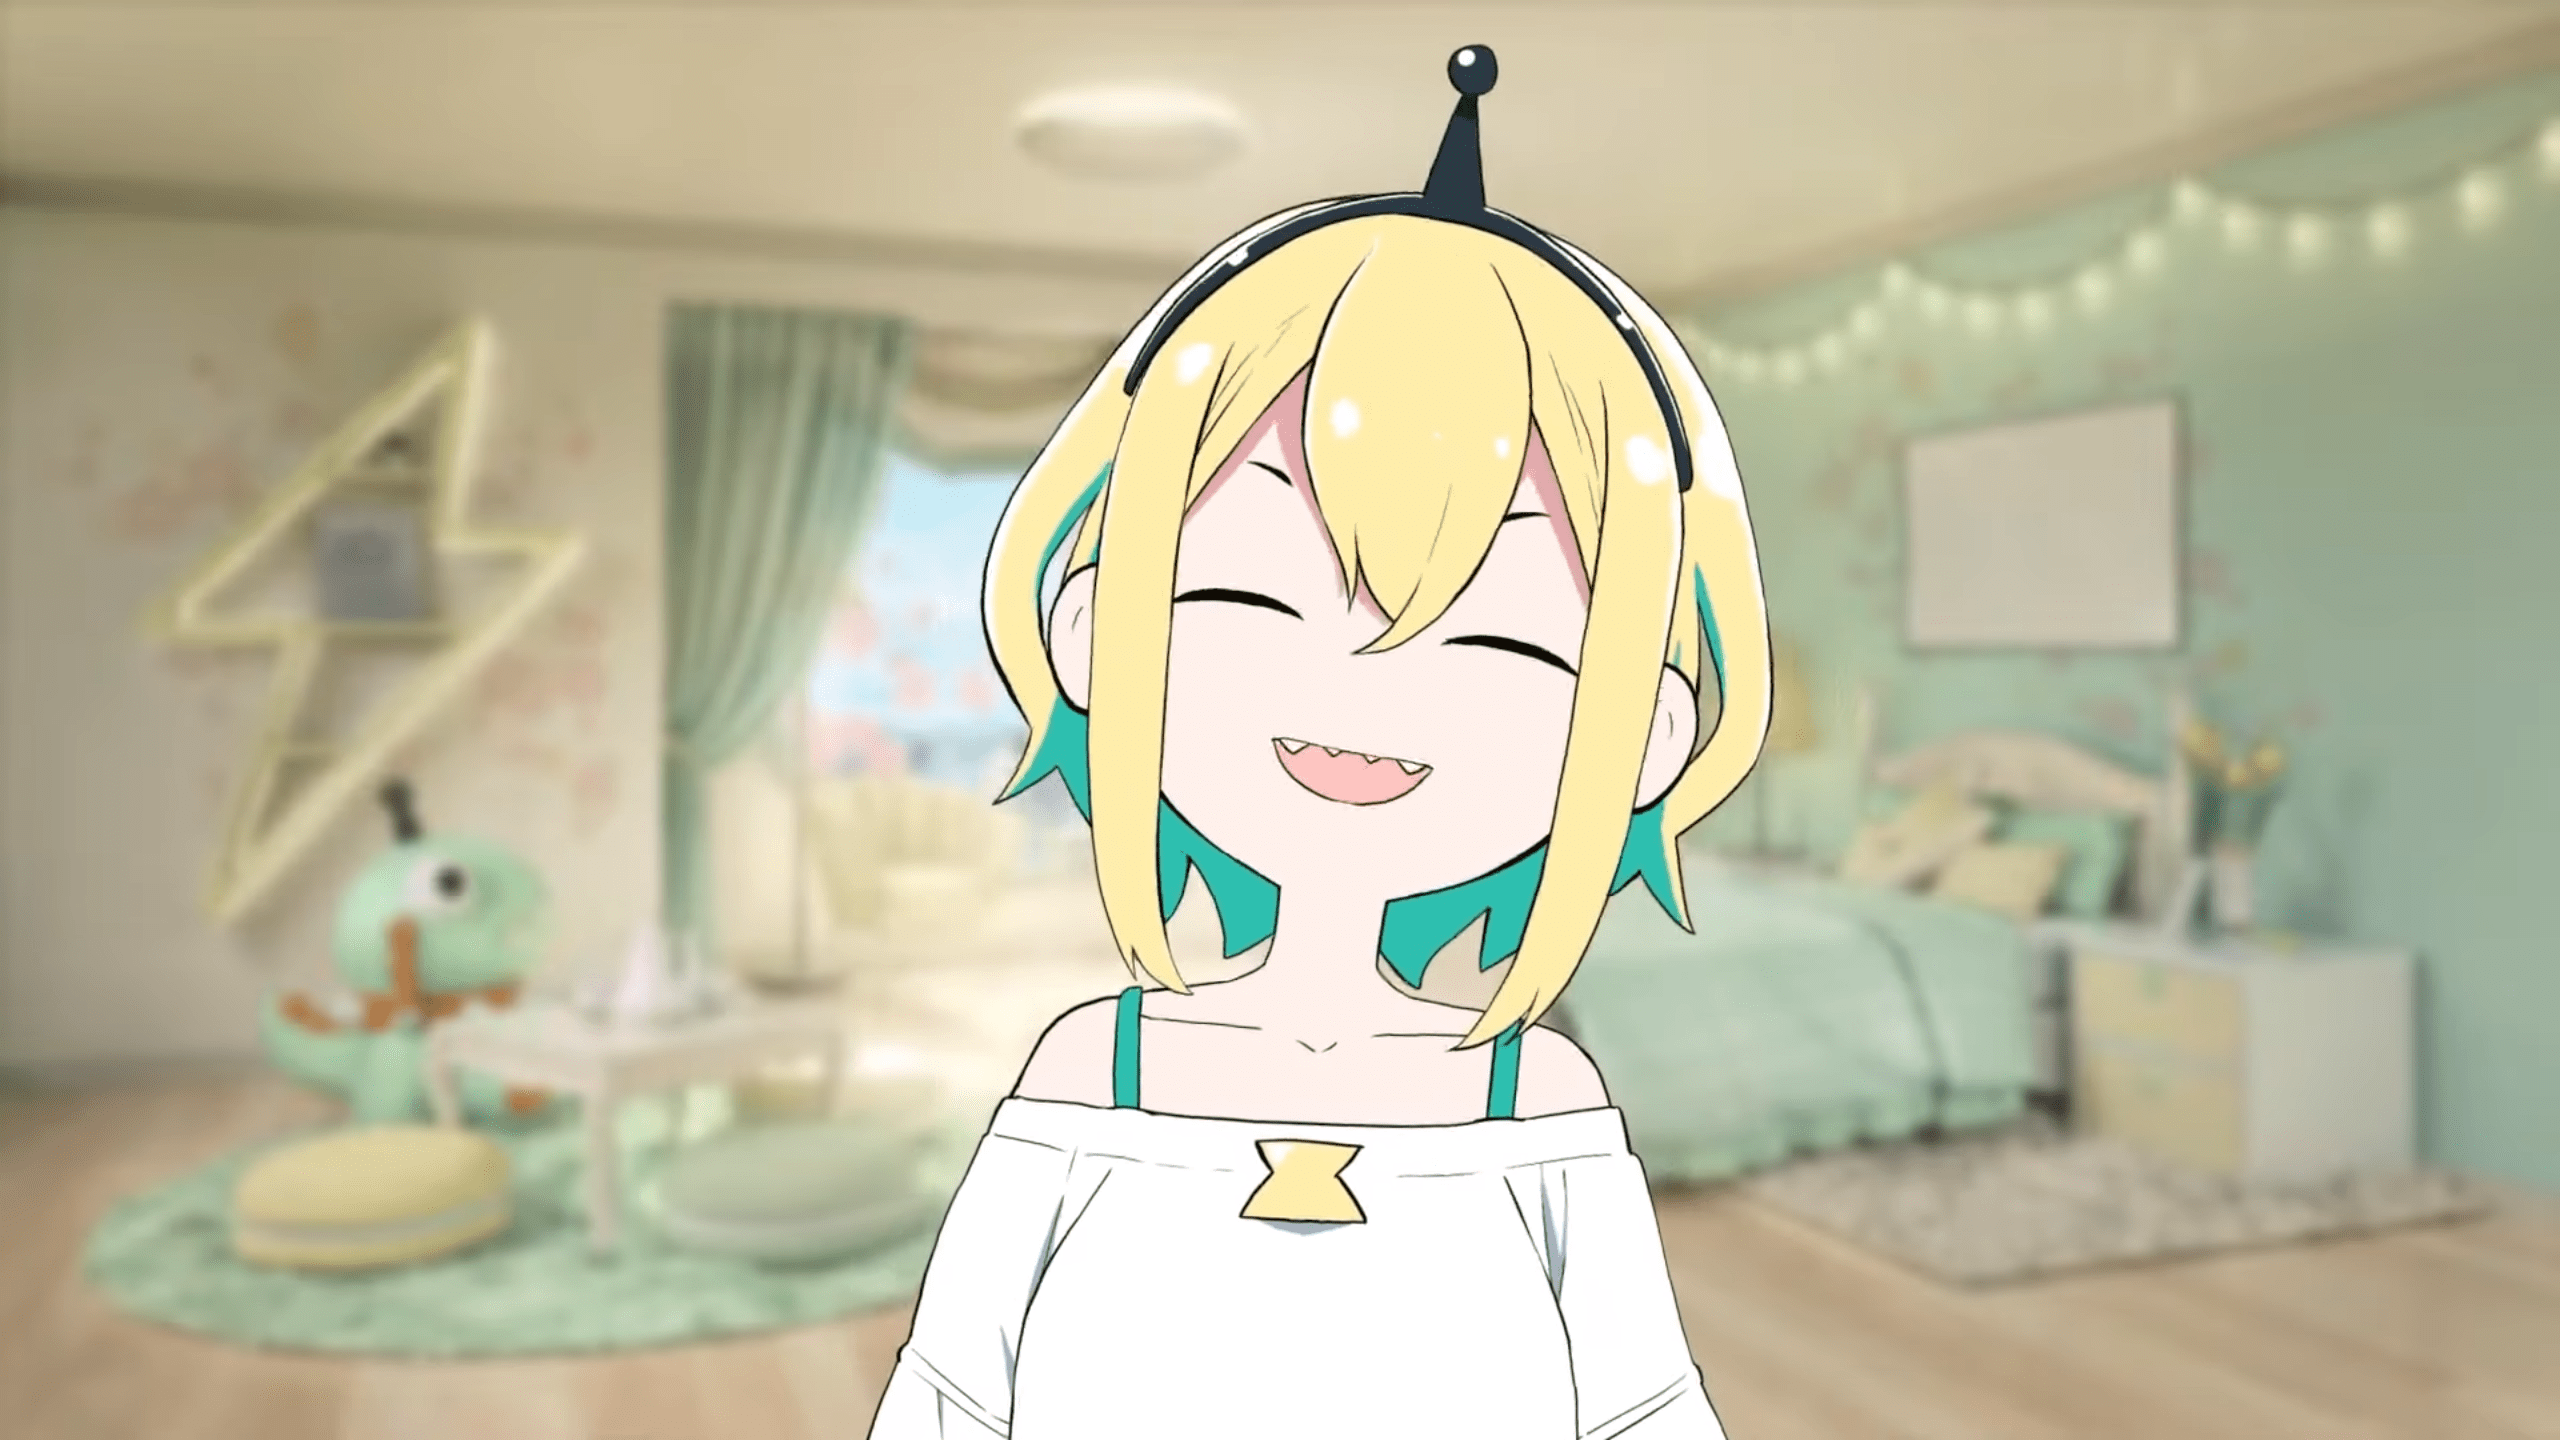 Setsu-Ani - VTuber News: VOMS Project officially announces the graduation  of member Amano Pikamee effective March 31, 2023. Earlier this evening,  VOMS Project officially announced the graduation of Amano Pikamee effective  this